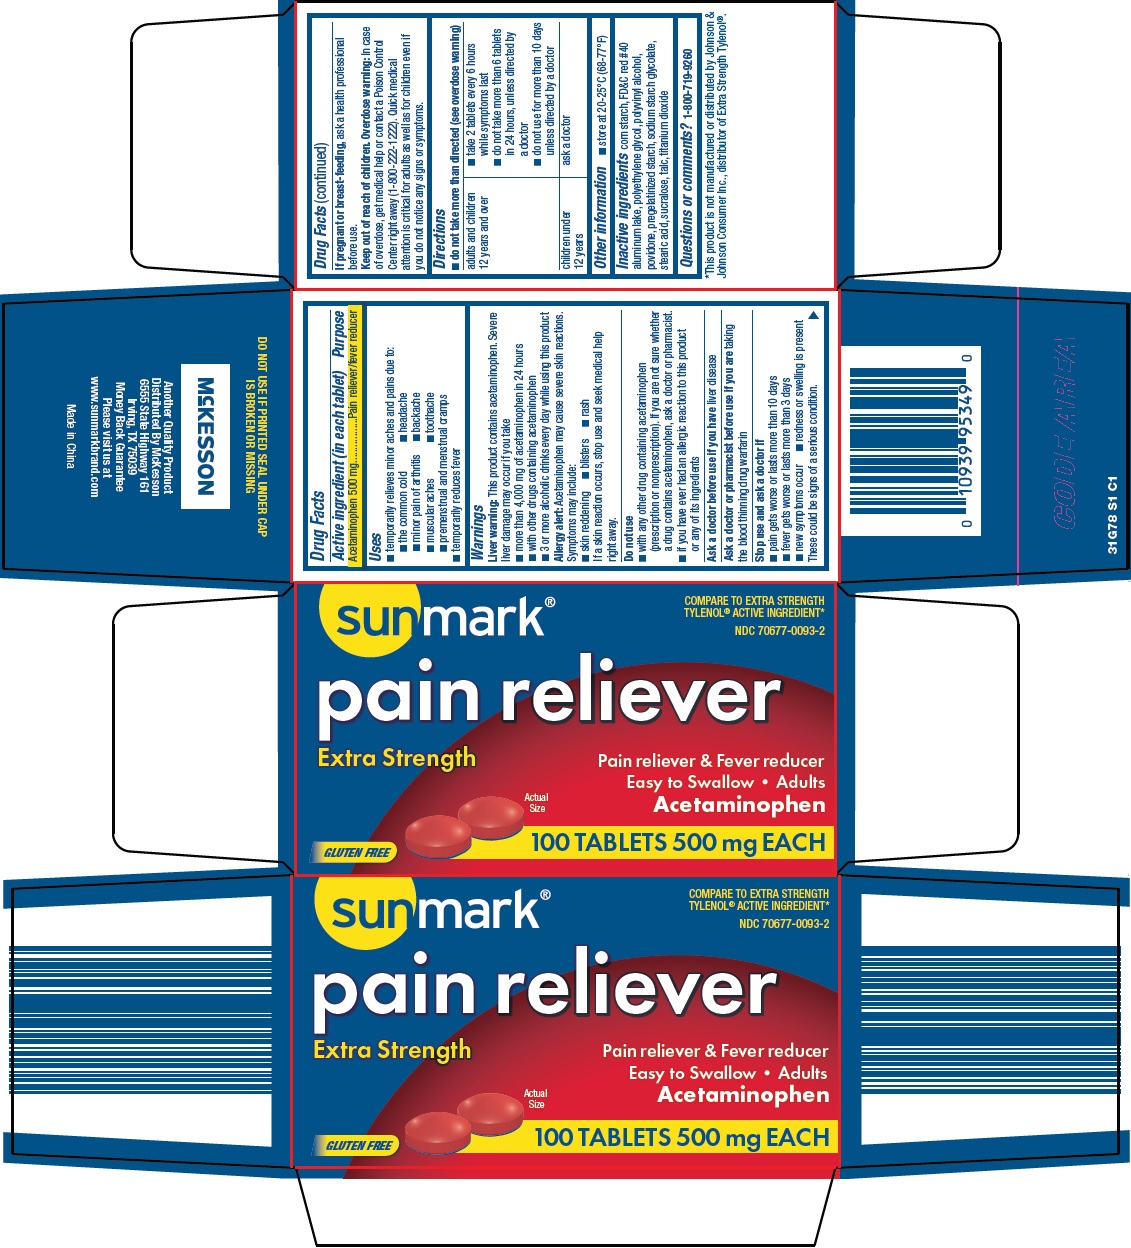 31g-s1-pain-reliever.jpg